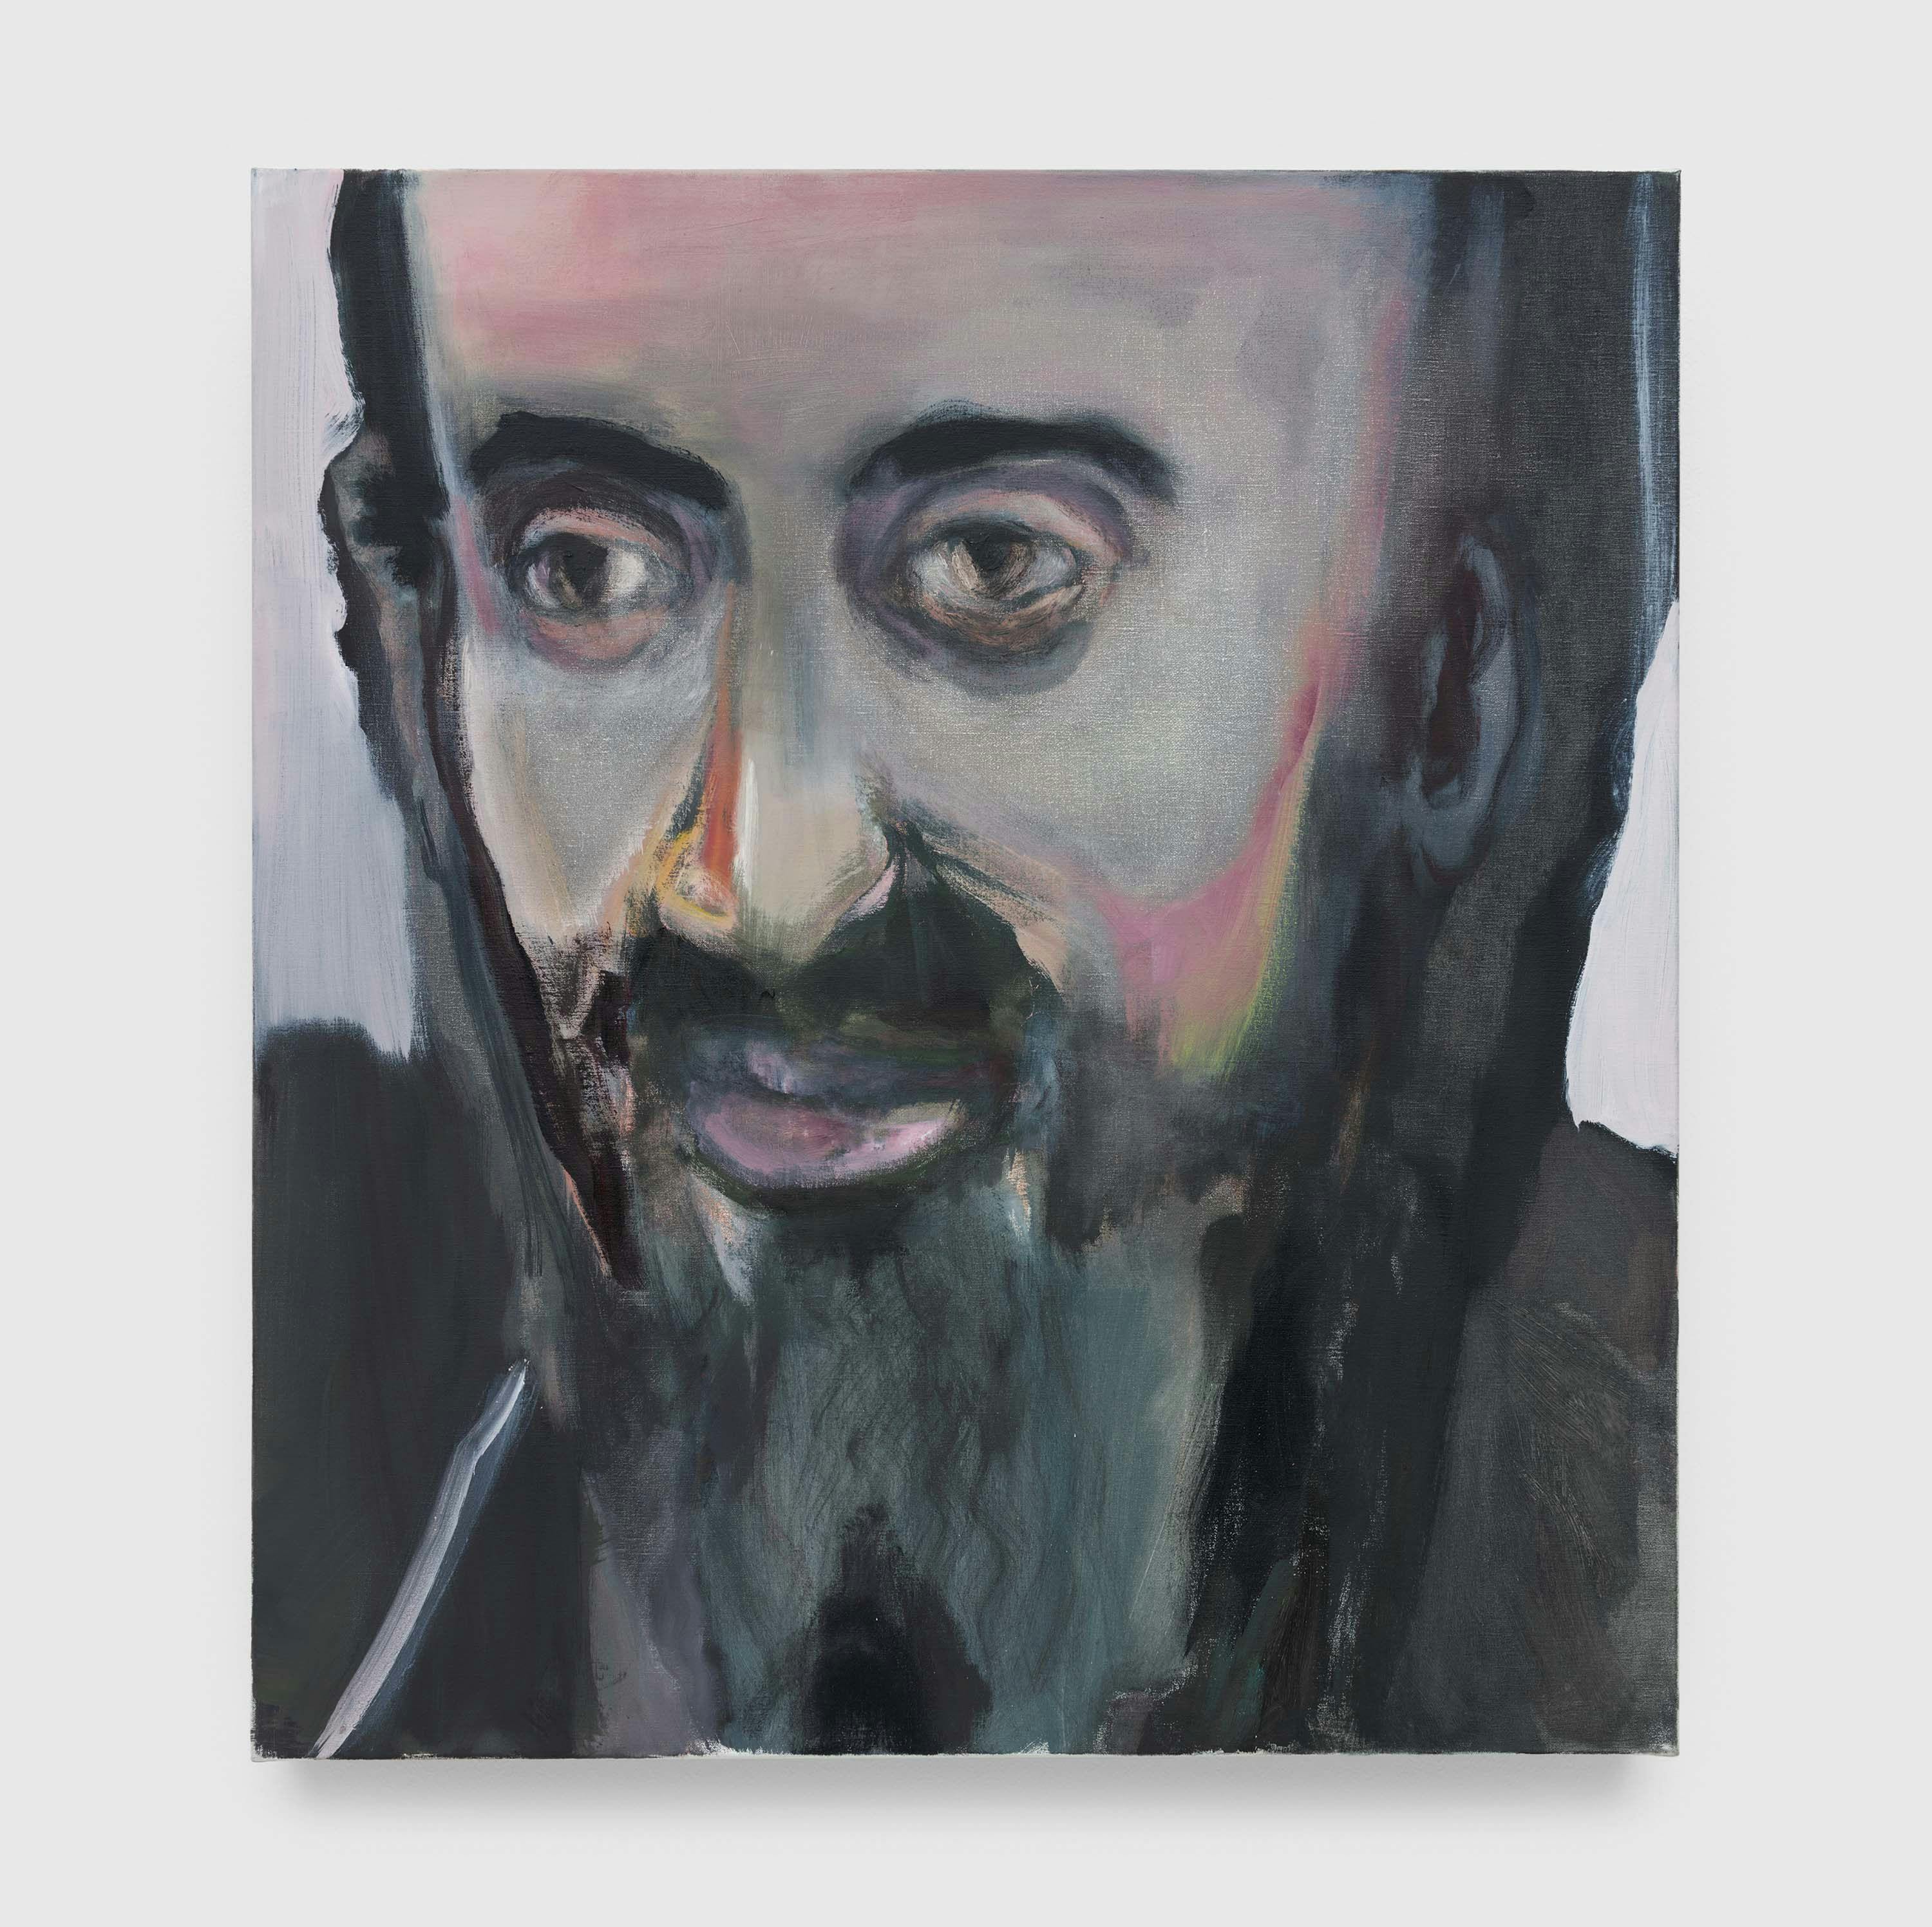 A painting by Marlene Dumas, titled The Pilgrim, dated 2006.